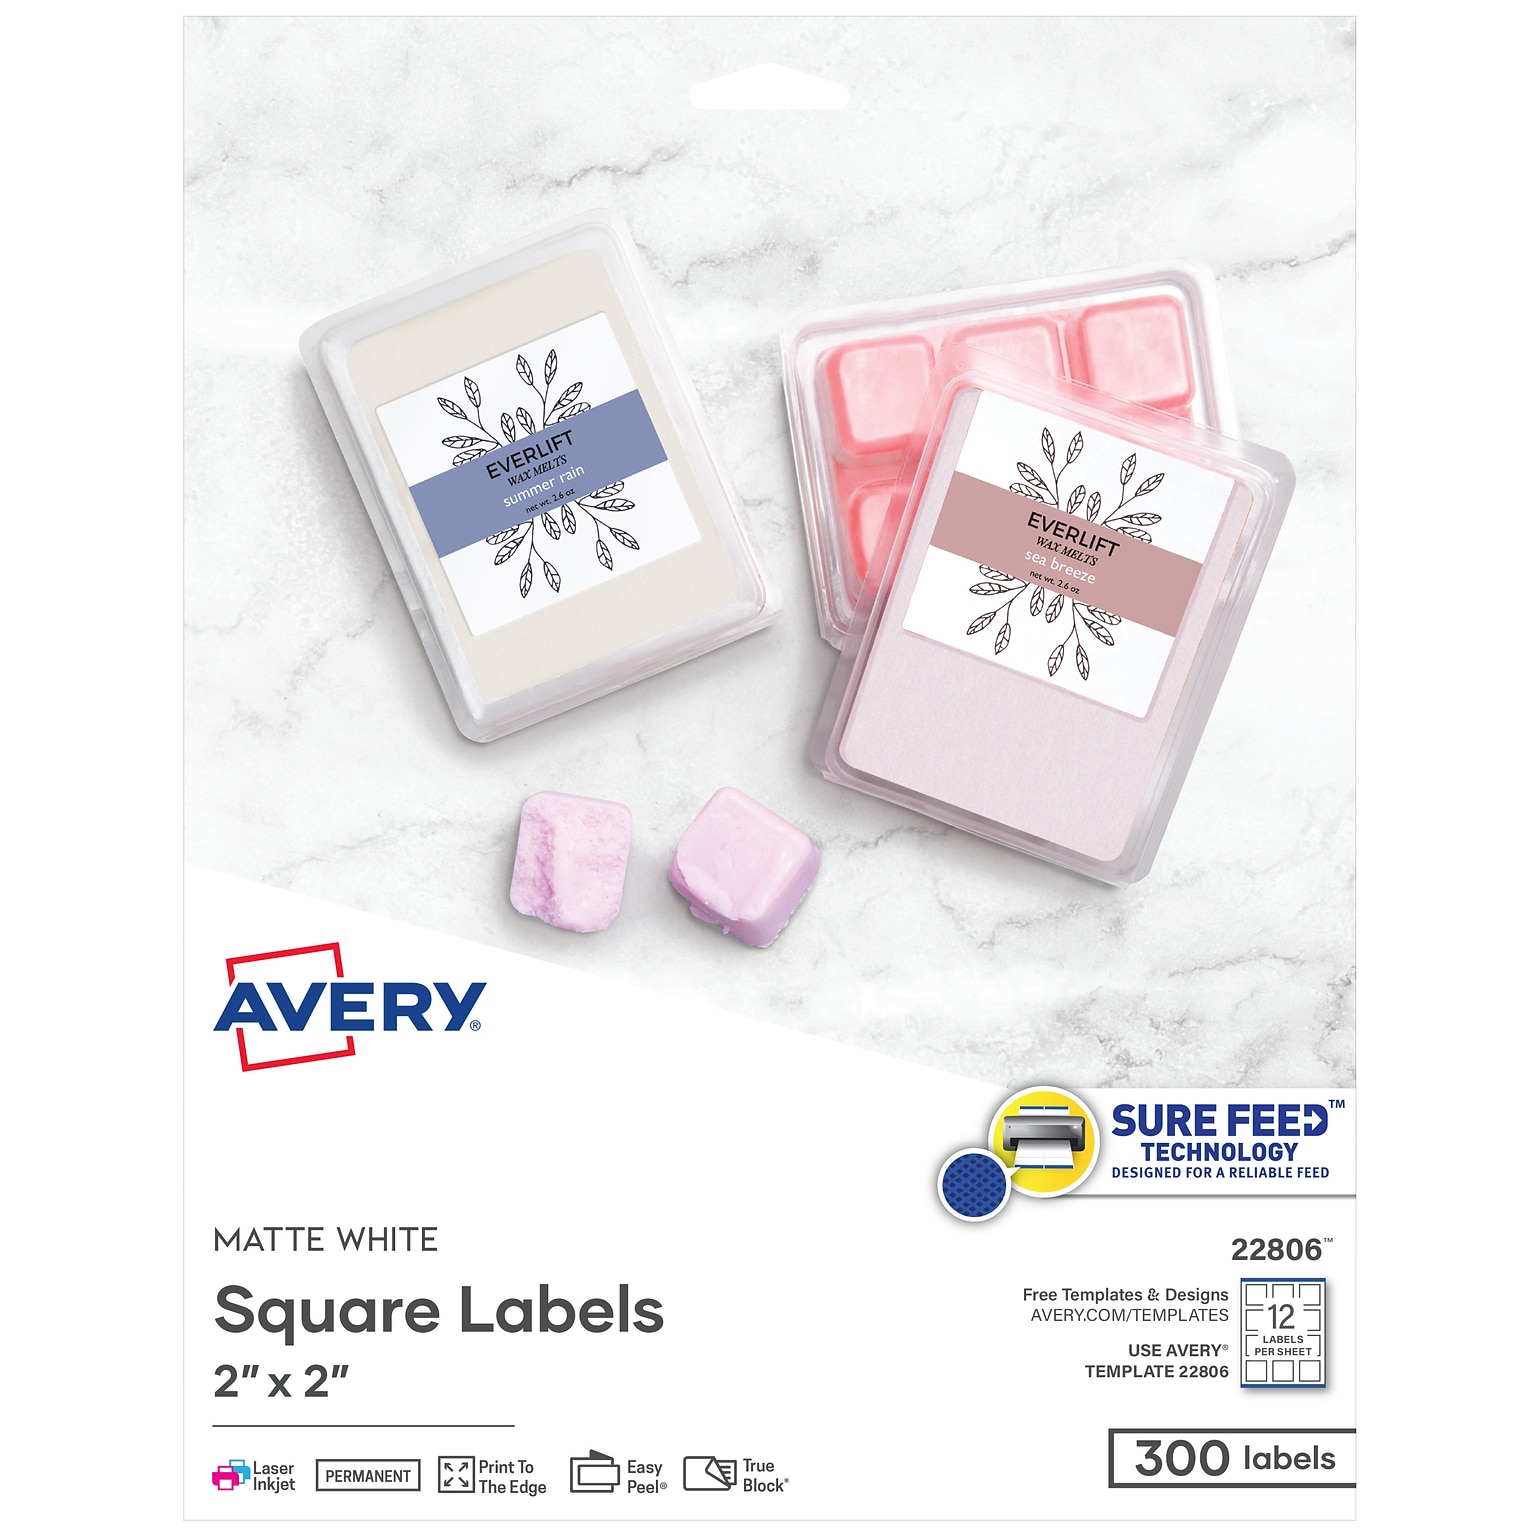 Avery Print-to-the-Edge Laser/Inkjet Square Labels, 2 x 2, White, 12 Labels/Sheet, 25 Sheets/Pack, 300 Labels/Pack (22806)